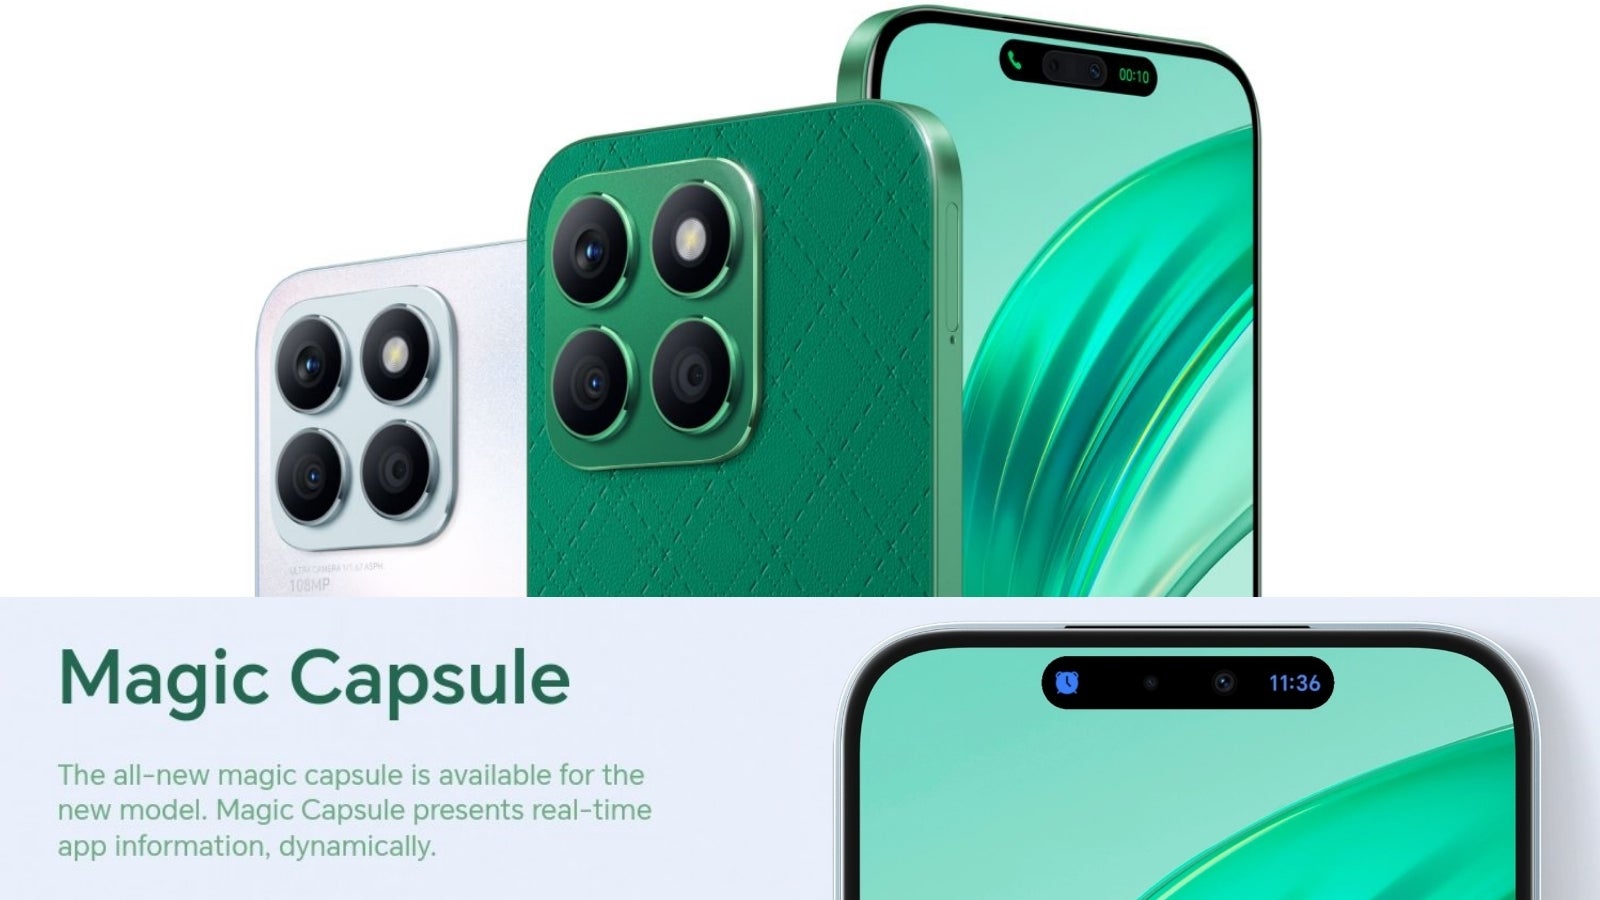 I must admit, “capsule” might’ve been the safer name option for the iPhone’s Dynamic Island. But Apple doesn’t do “safe” names. - $200 iPhone 15 Pro Max copy proves Apple is Android’s favorite role model, but this should change